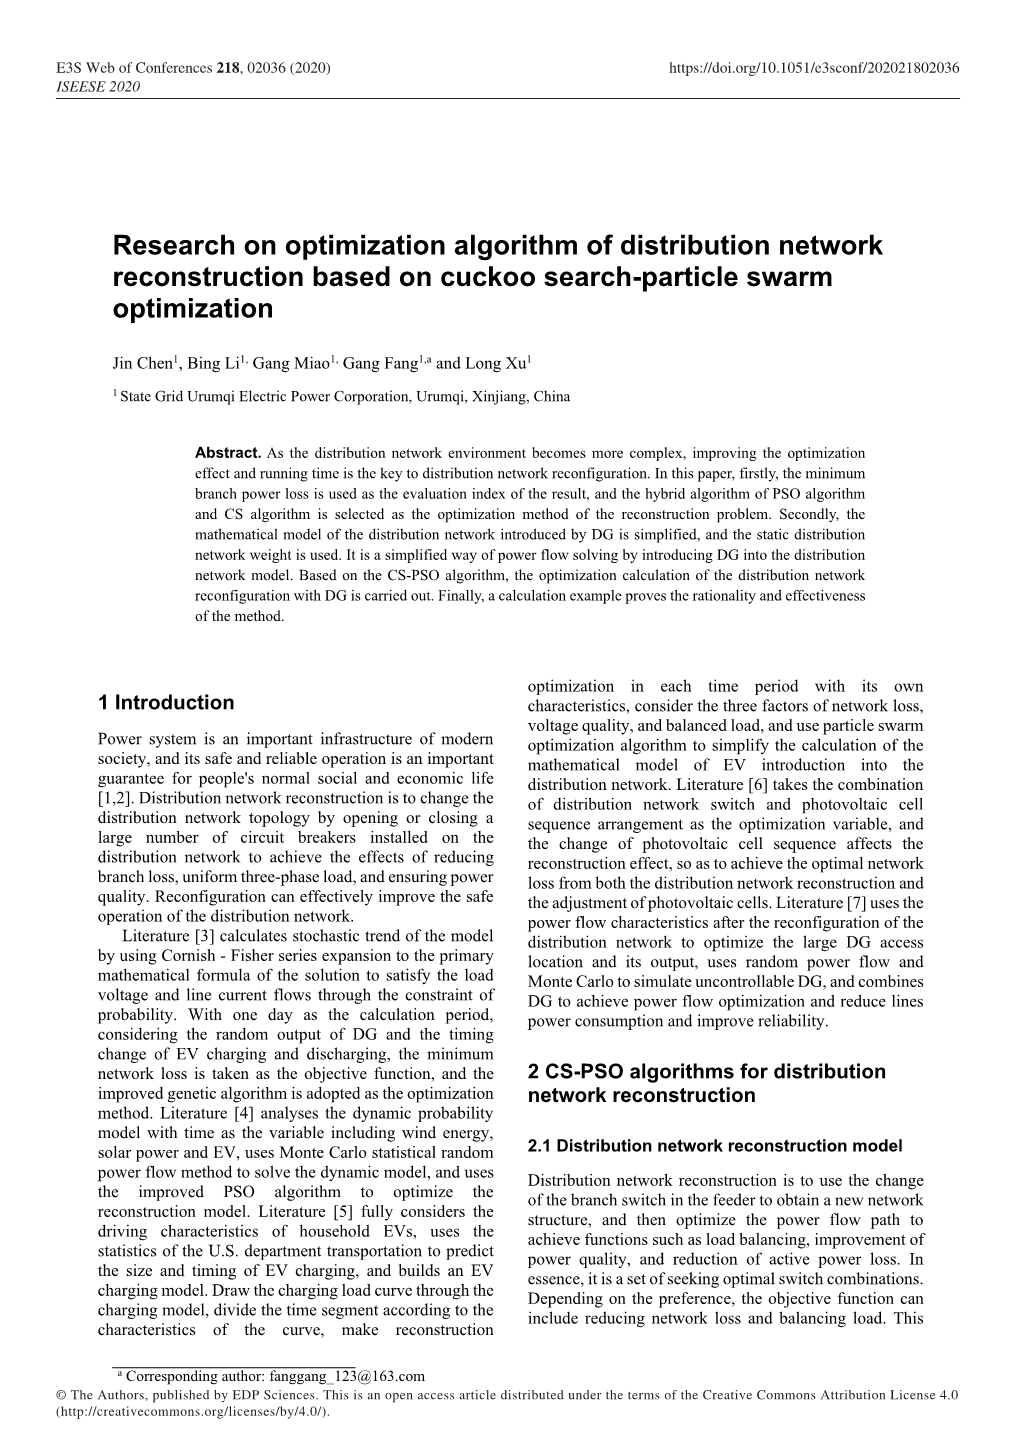 Research on Optimization Algorithm of Distribution Network Reconstruction Based on Cuckoo Search-Particle Swarm Optimization